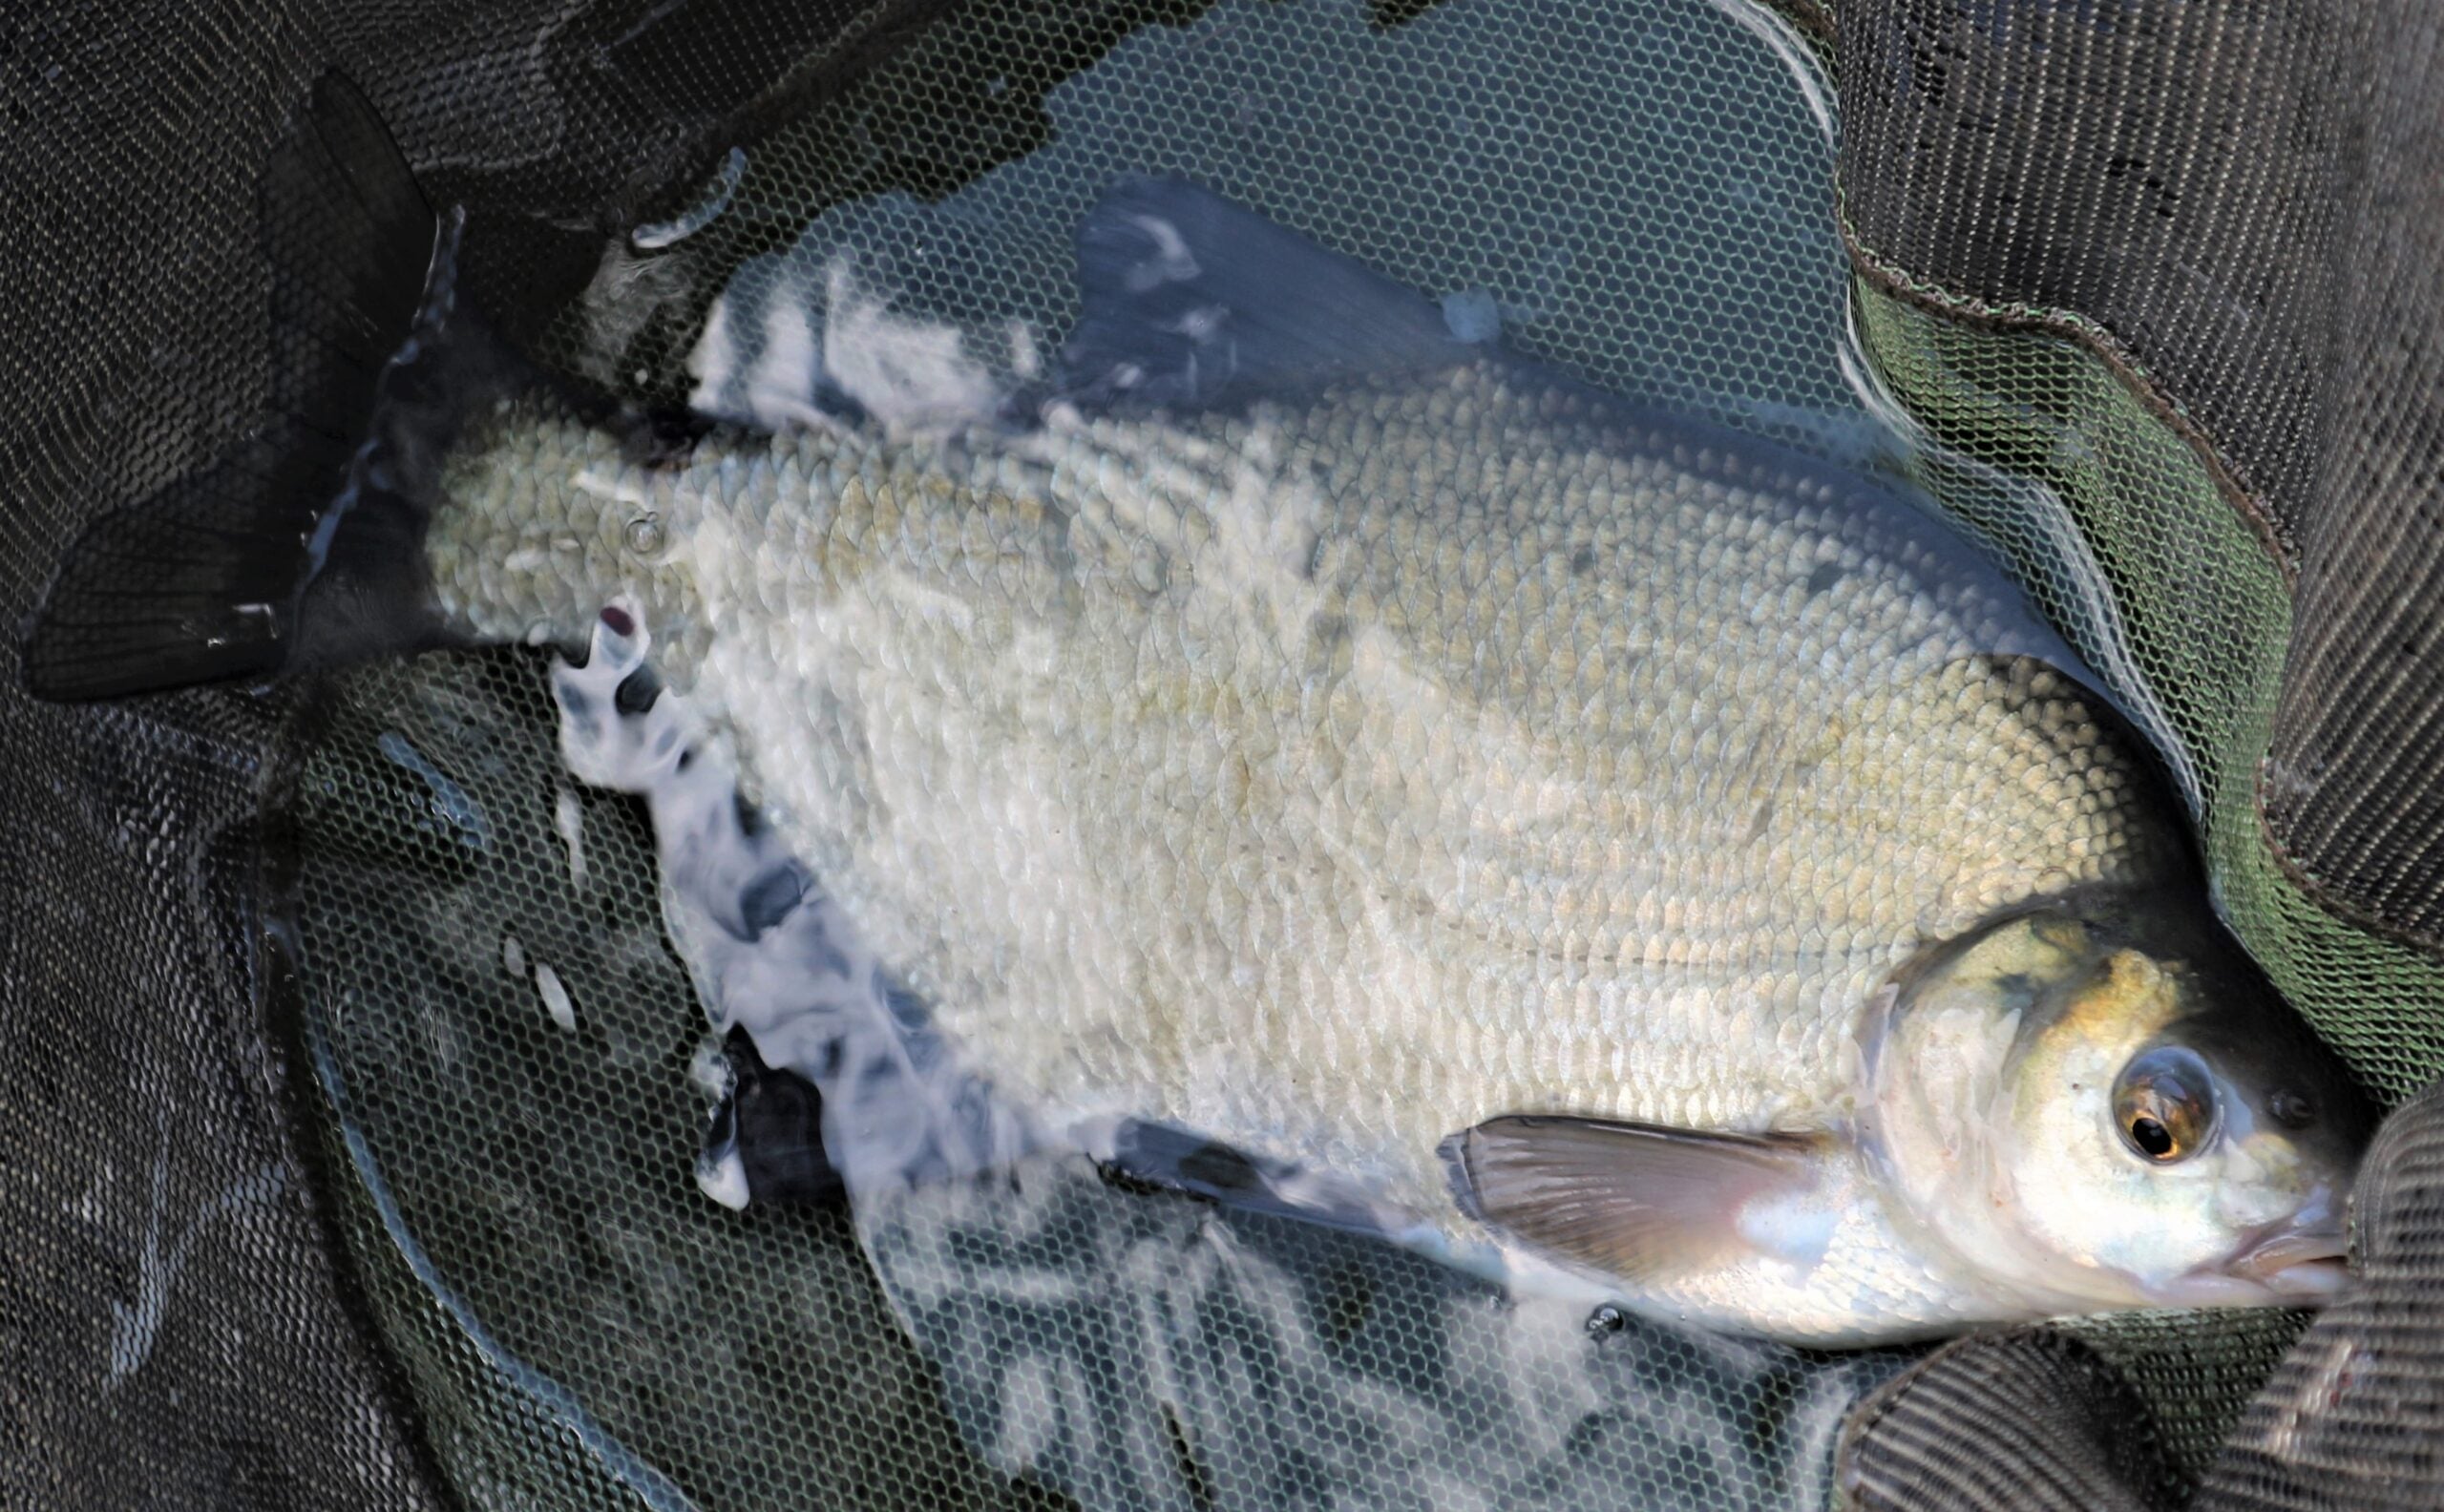 Silvers on the waggler